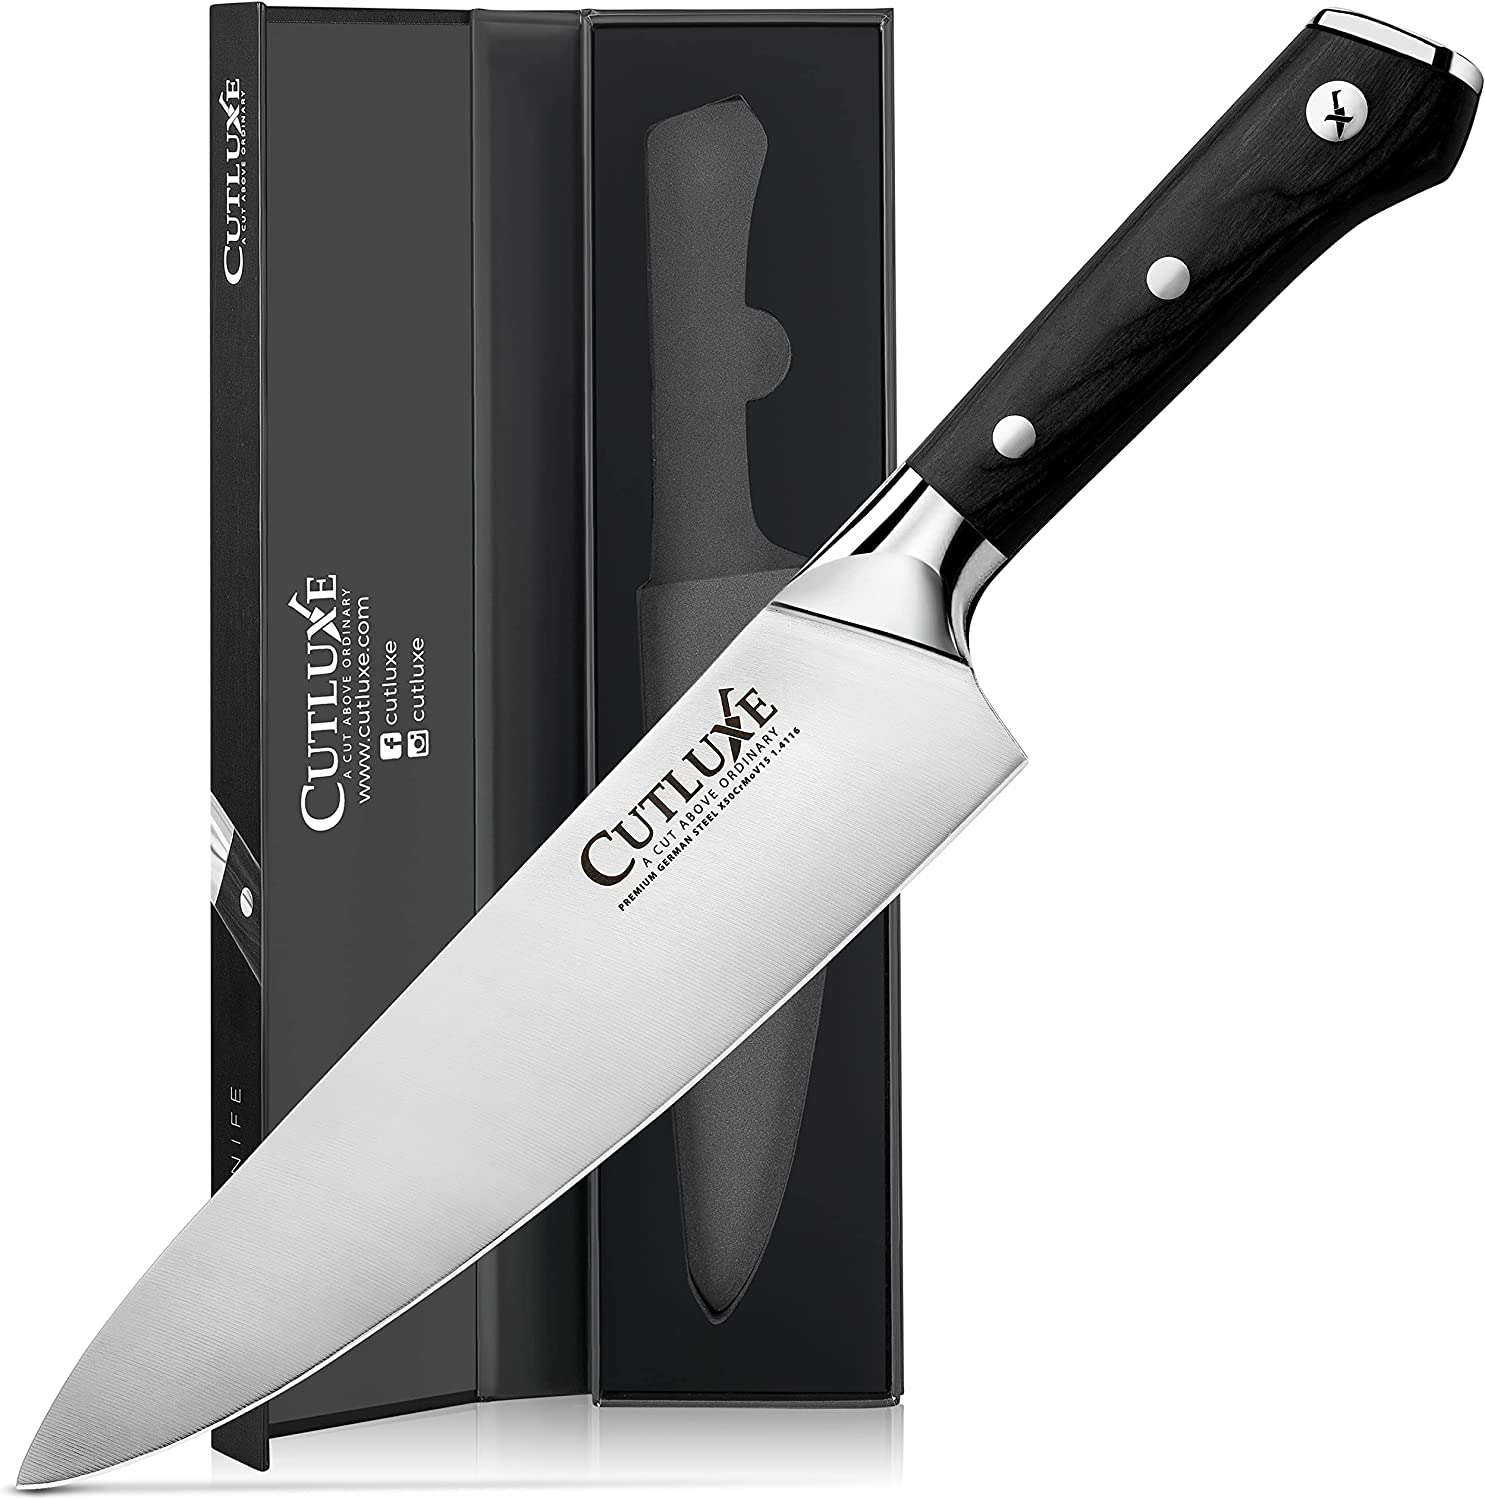 8 Chef Knife, Professional Stainless Steel Kitchen Cooking Knife